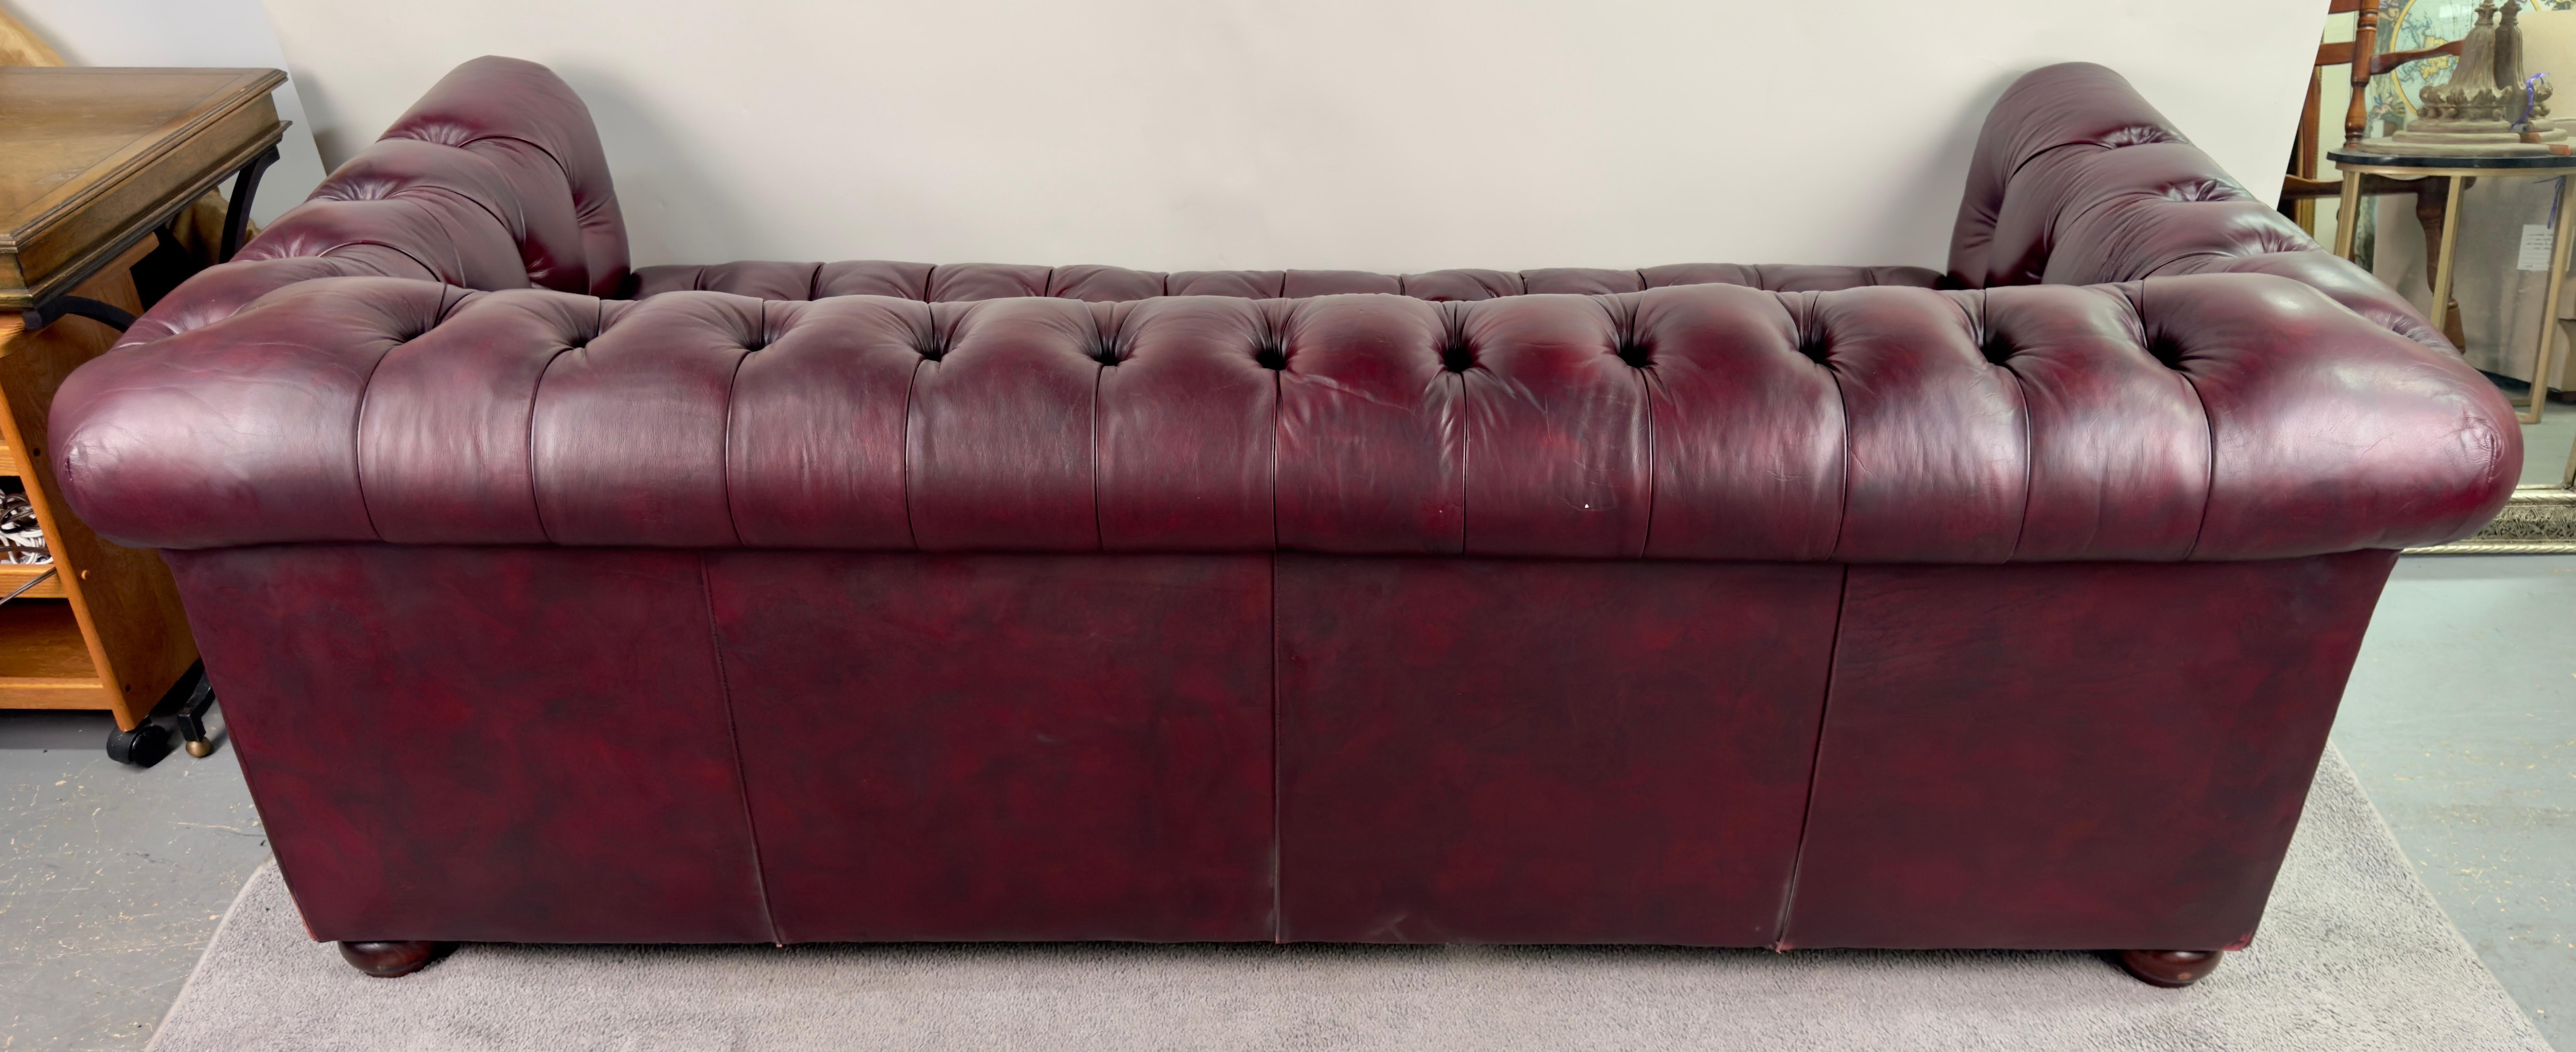 Hancock & Moore English Style Chesterfield Cranberry leather Sofa & Sofa Bed 5